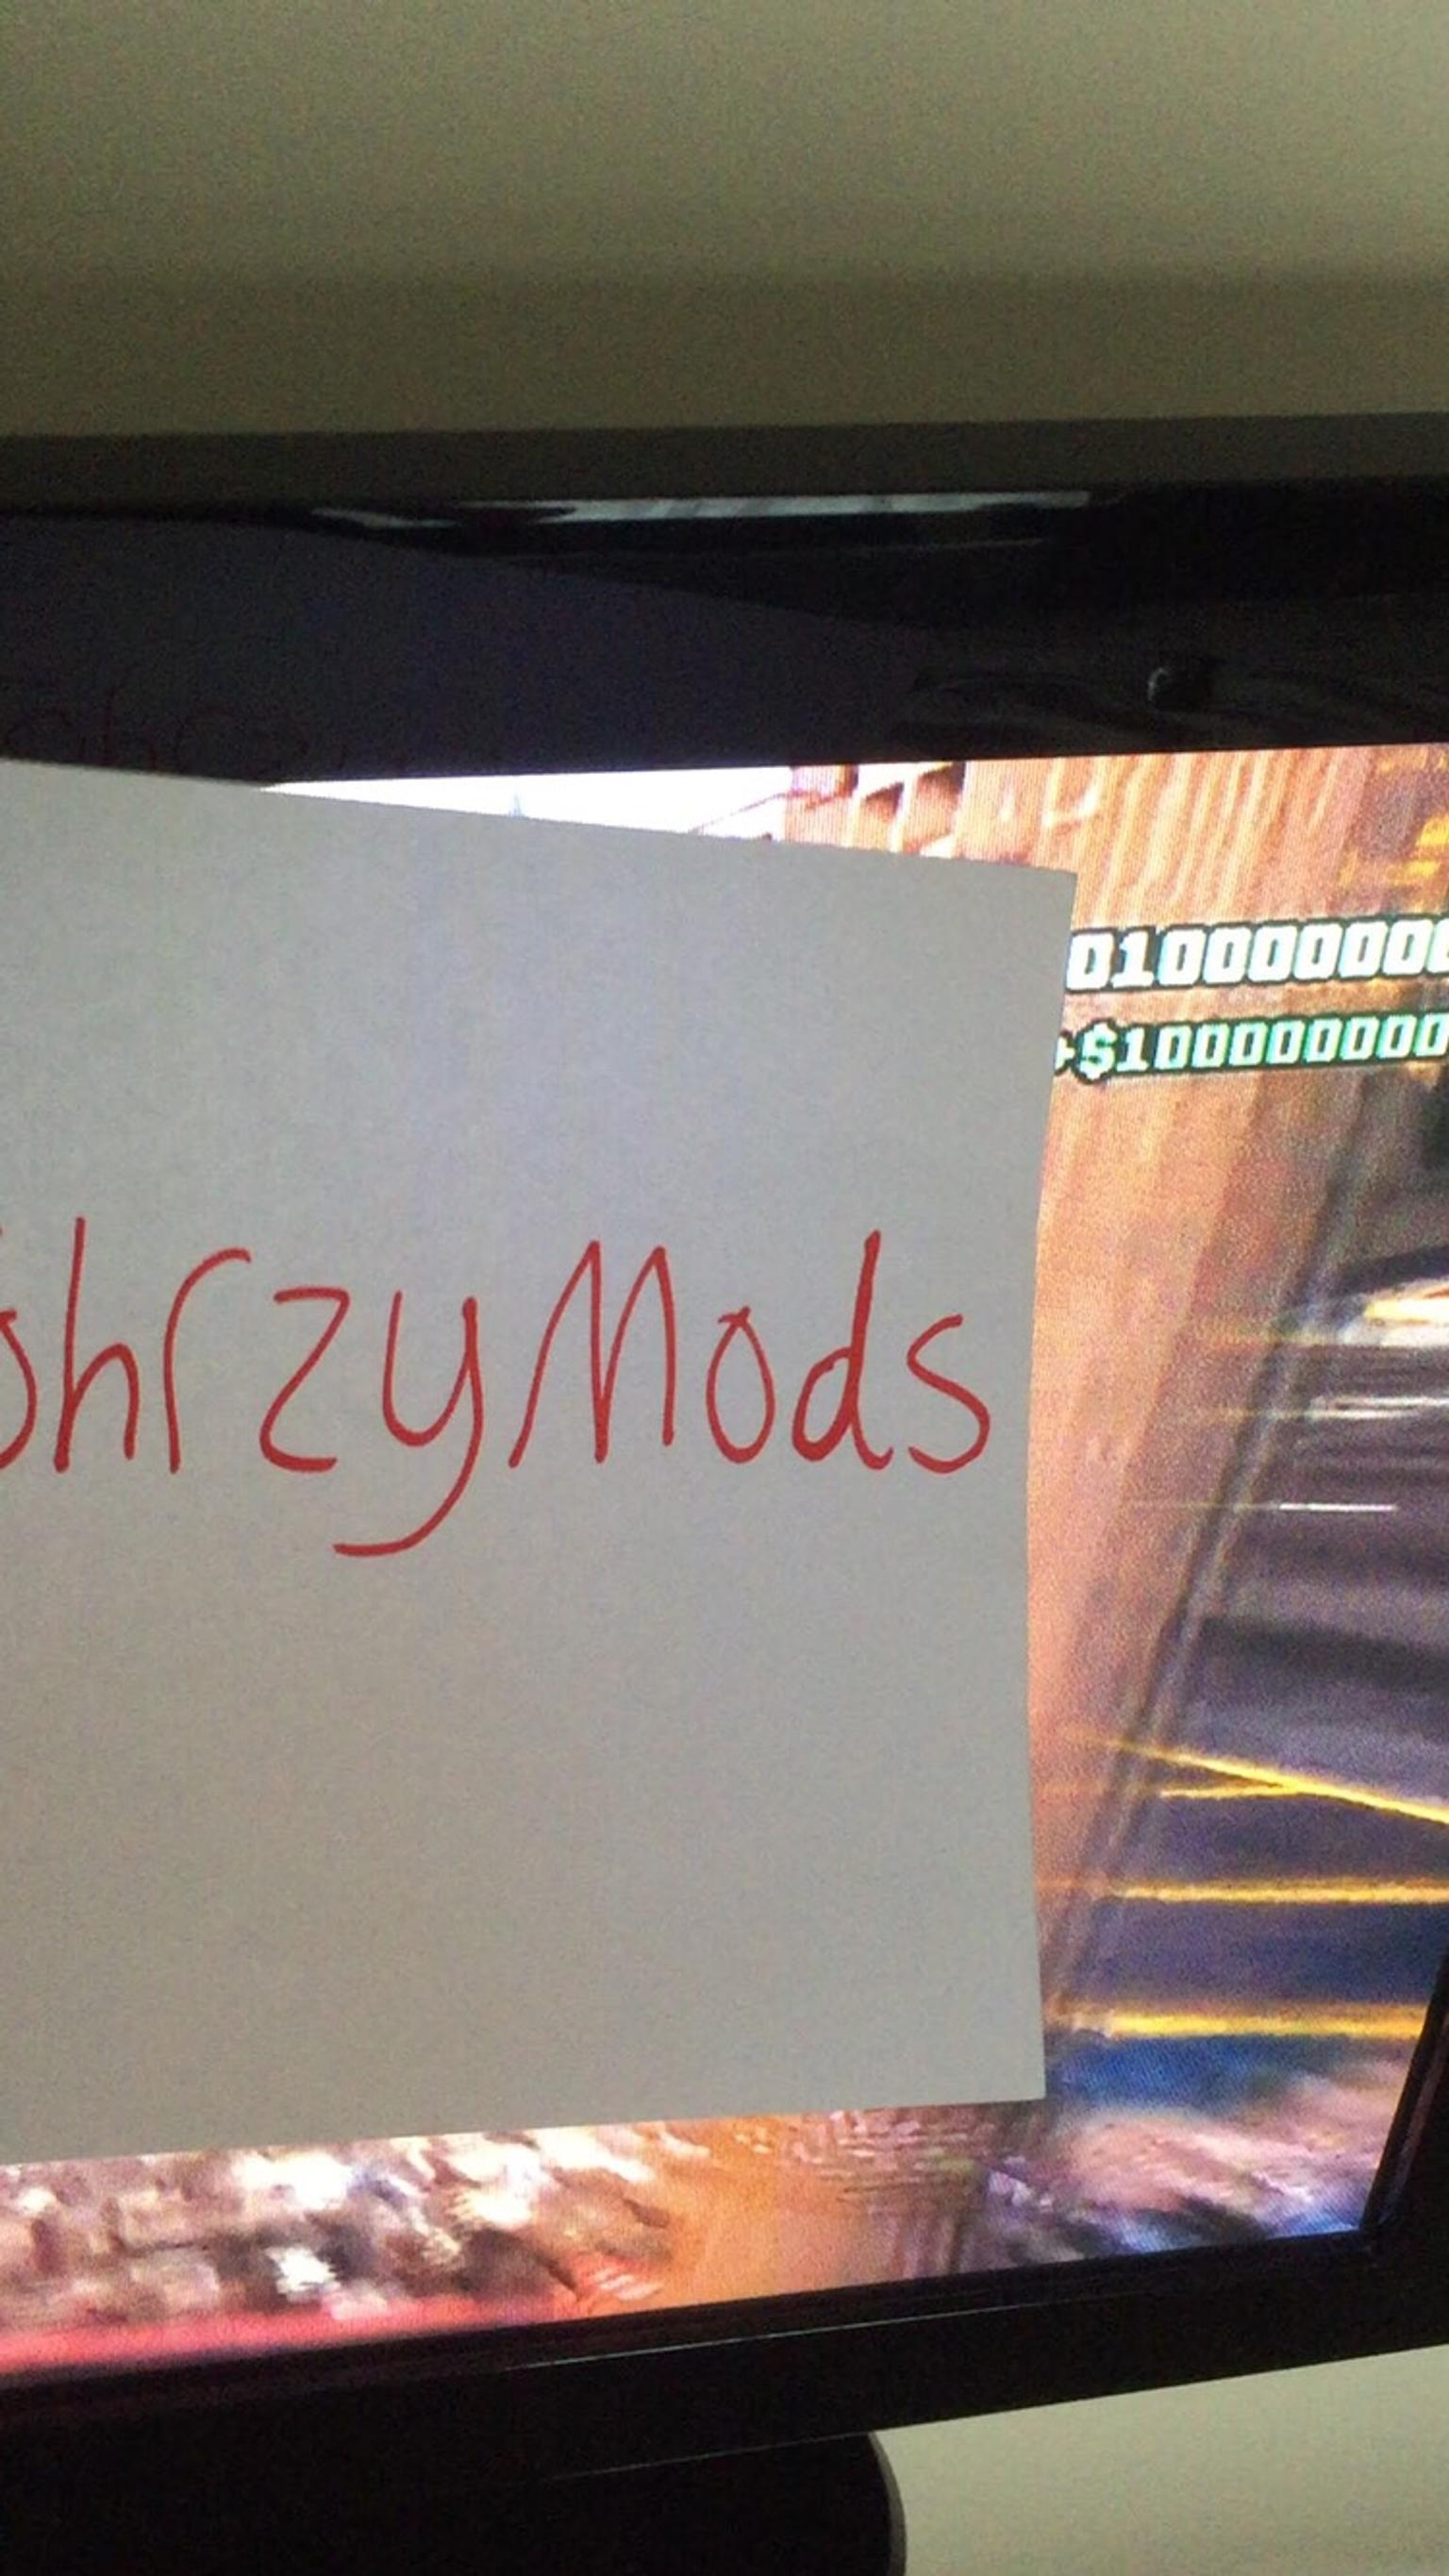 gta 5 modded accounts for sale xbox one